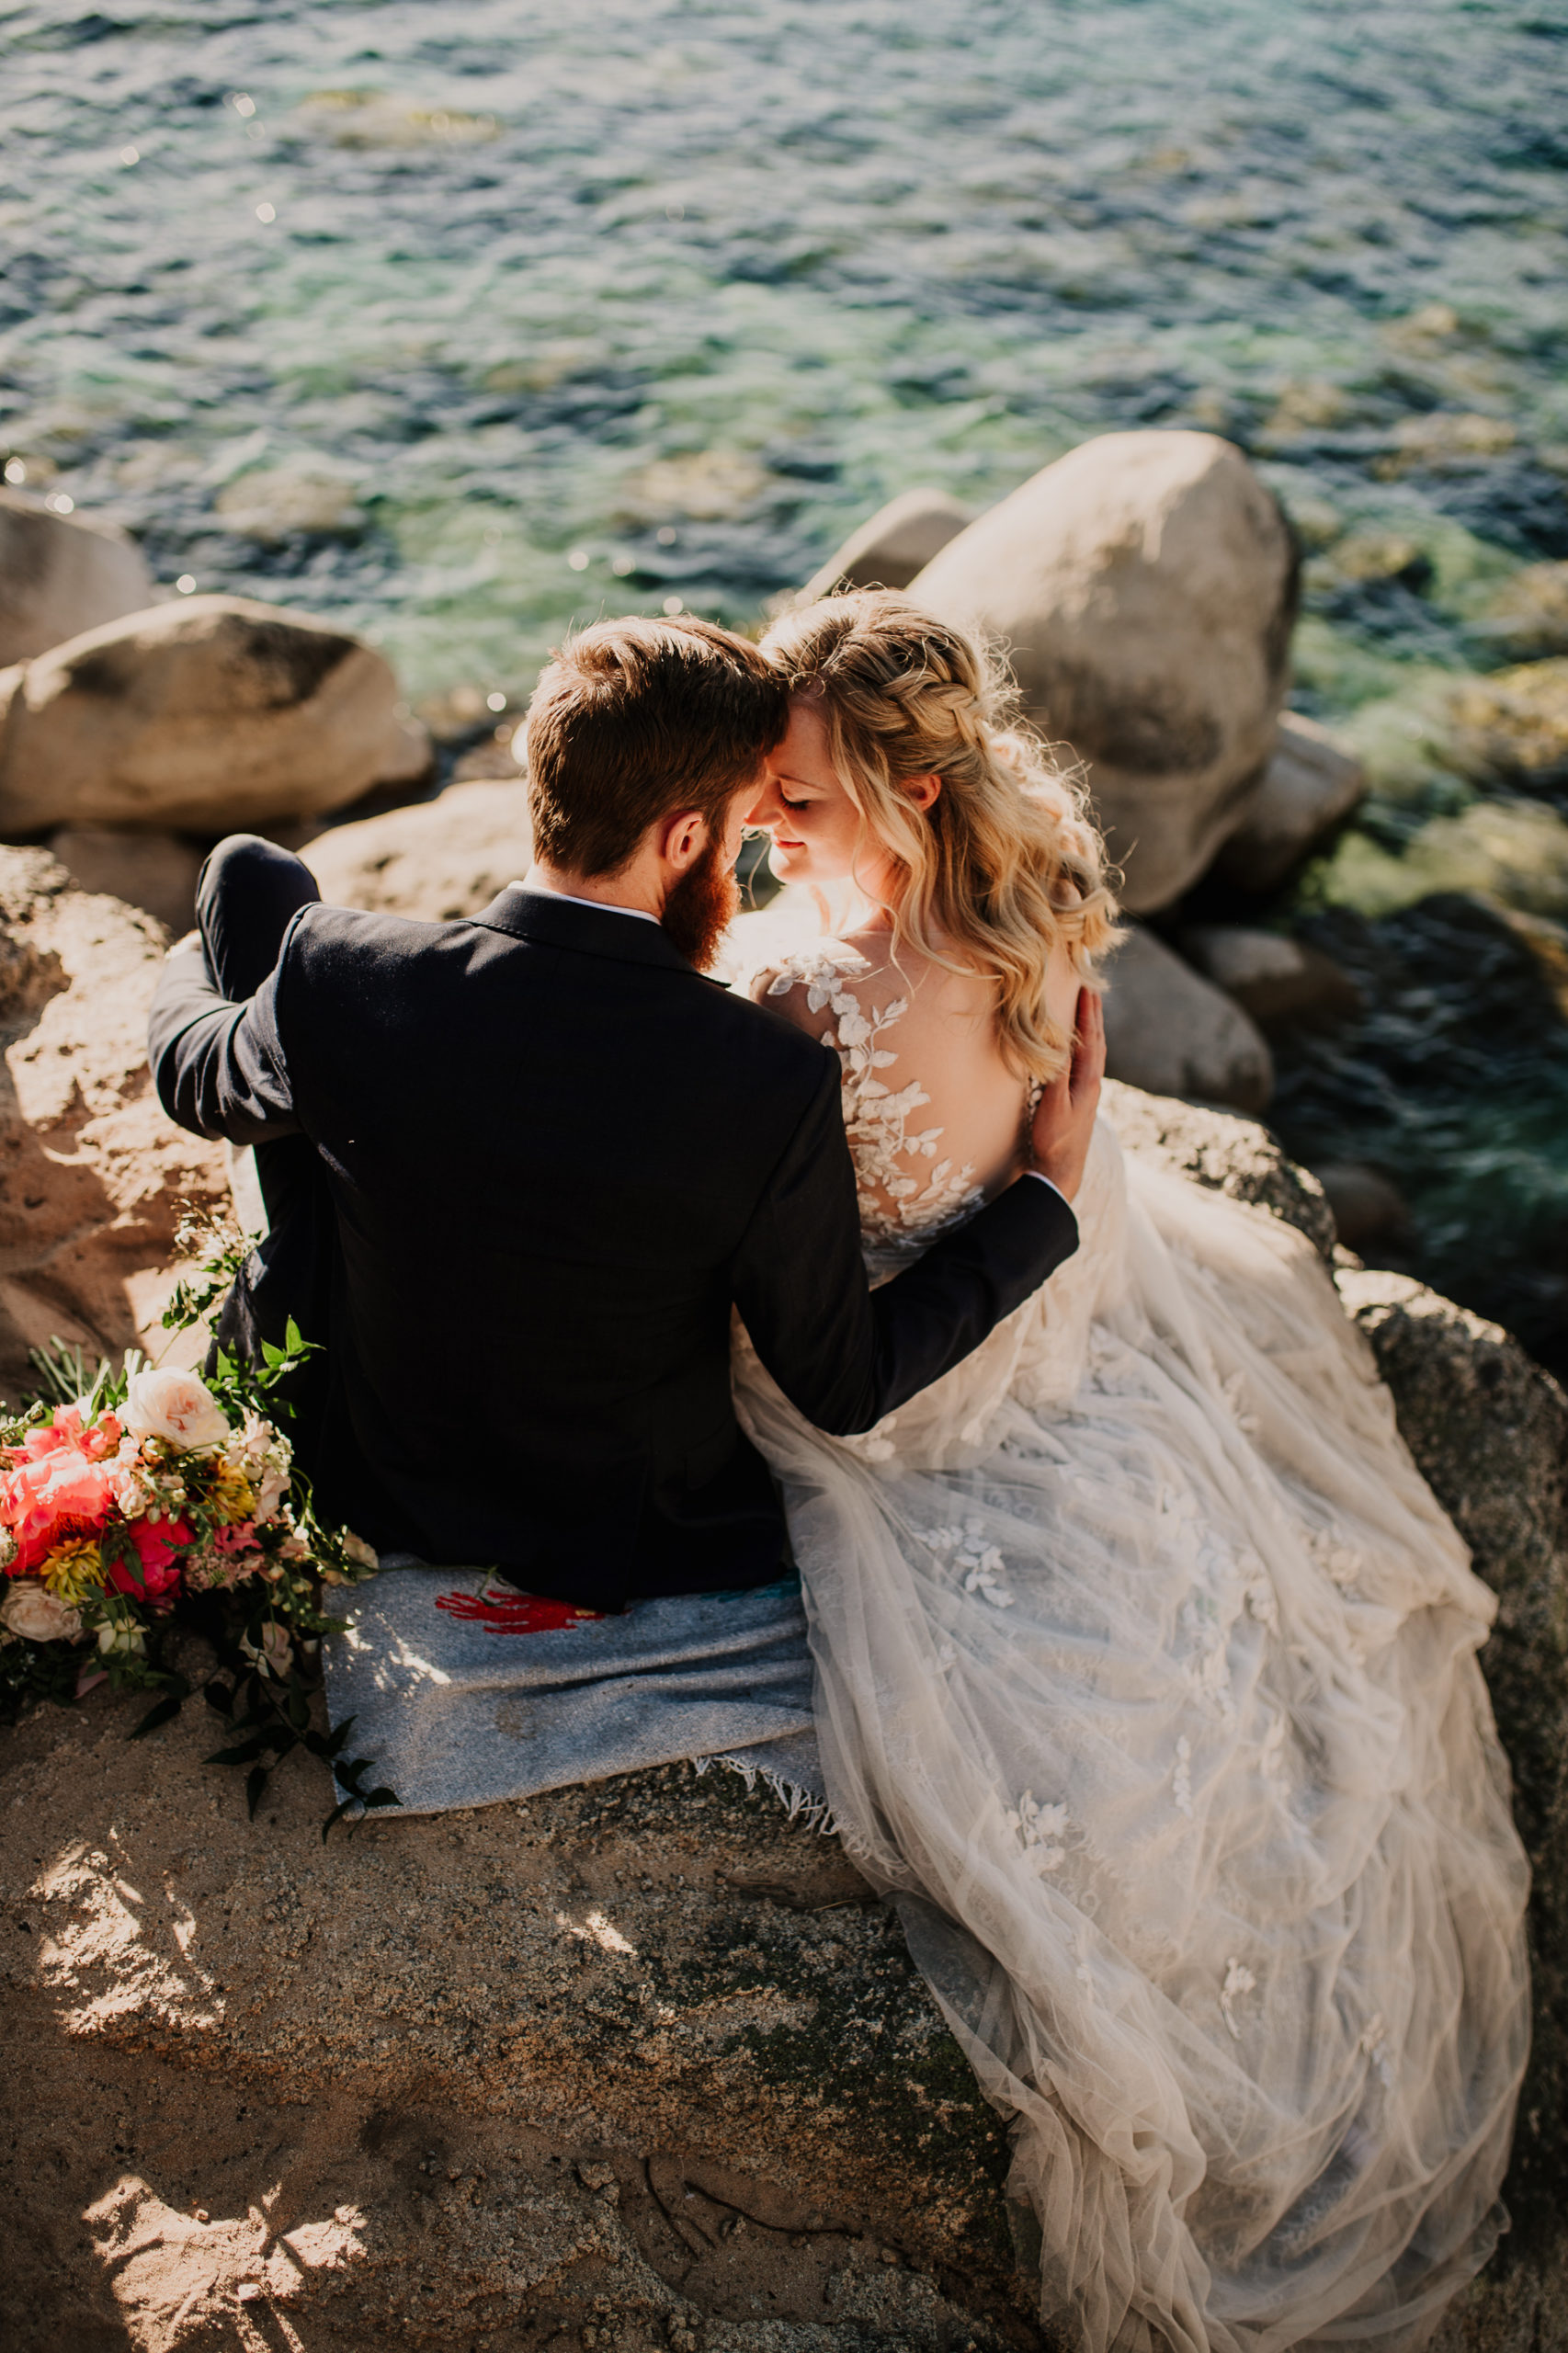 Best West Coast Elopement Locations, Where to elope in Lake Tahoe - Sand Harbor North Lake Tahoe